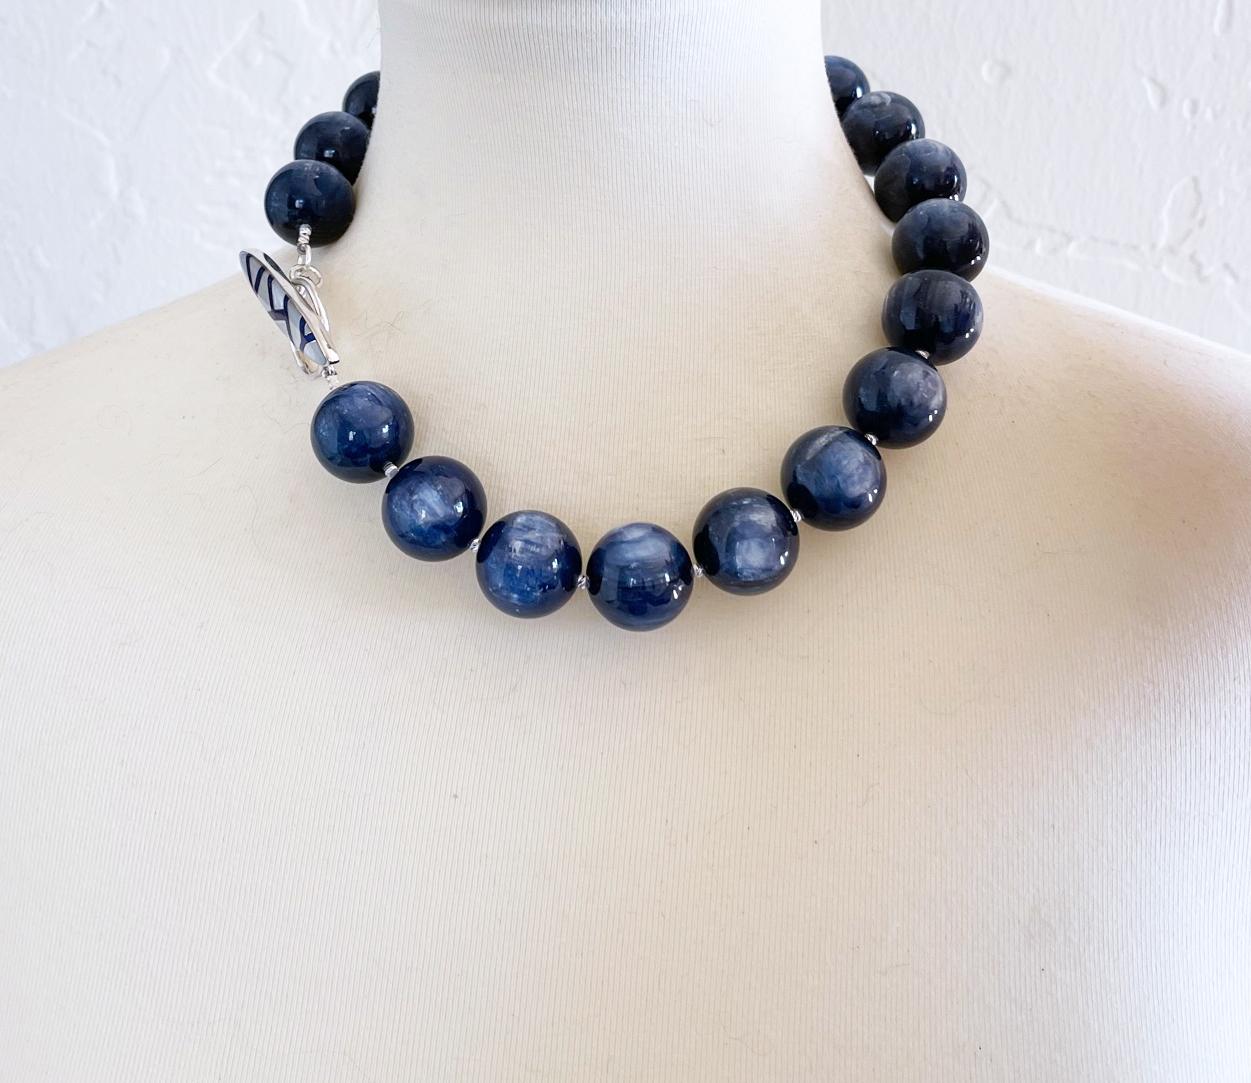 Gorgeous shimmering necklace made with superb quality 20mm round navy blue kyanite gemstone beads, sterling silver accent beads, and an elegant custom sterling toggle clasp with lapis lazuli and mother of pearl inlay. This necklace was handcrafted